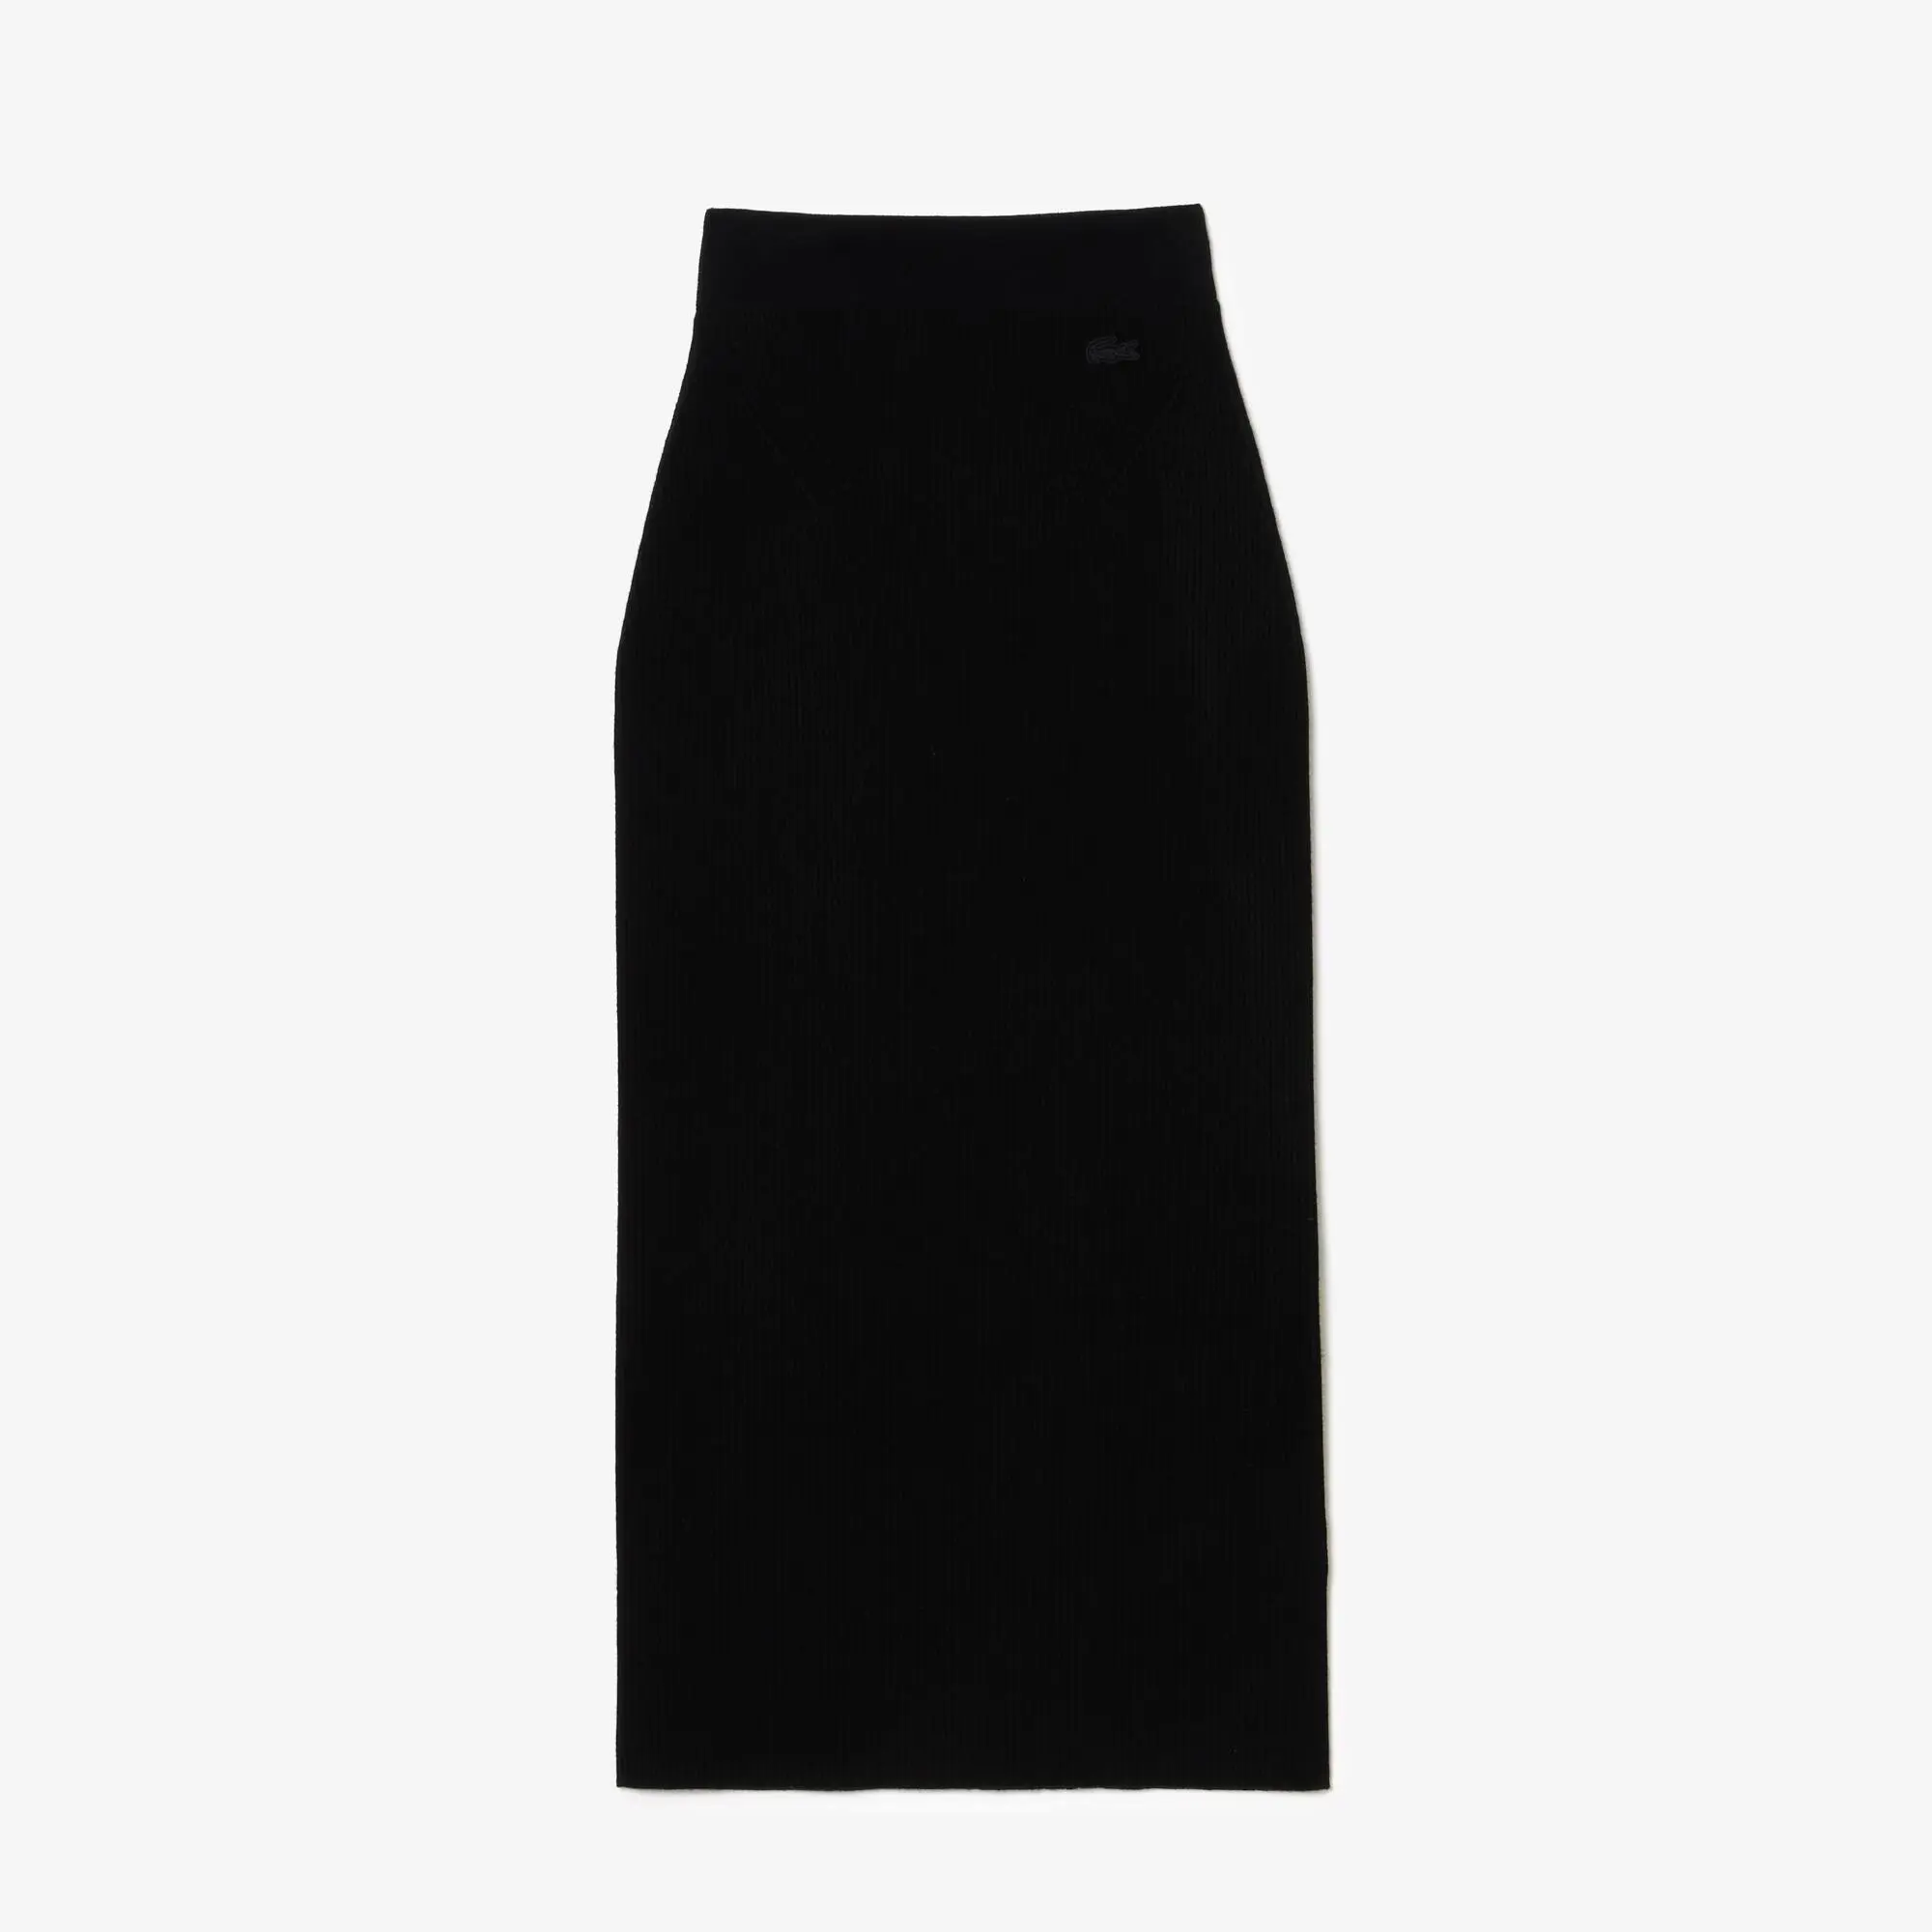 Lacoste Ribbed, Seamless Knit Pencil Skirt. 2